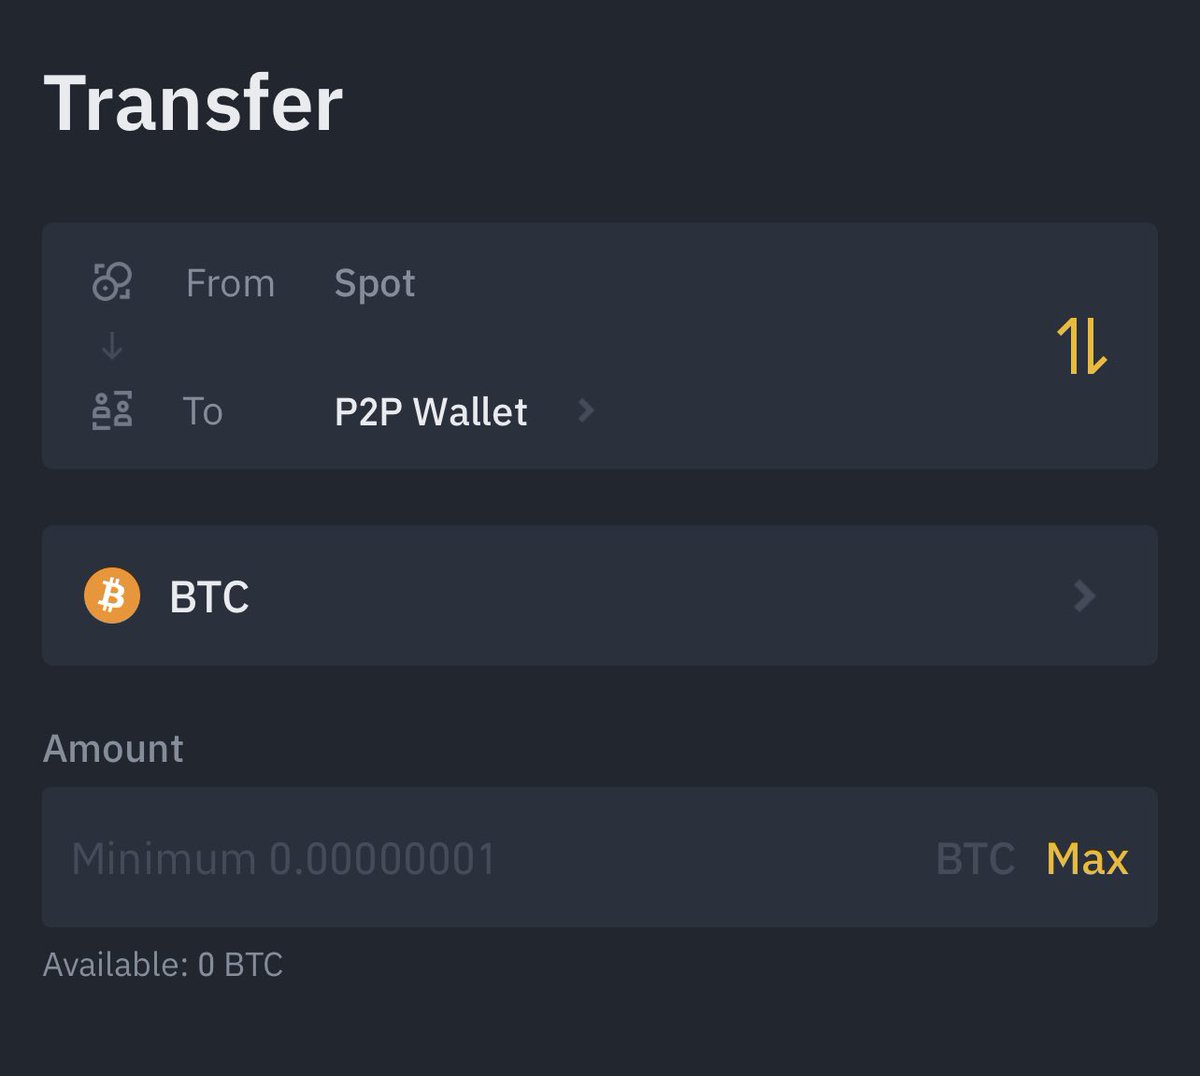 -Click Transfer and a window Pops up with “Send or Transfer”, Select Transfer.-Click on BTC and Change to USDT-Click Max to transfer all and Confirm Transfer. Your funds will be transferred to your Spot wallet from P2P